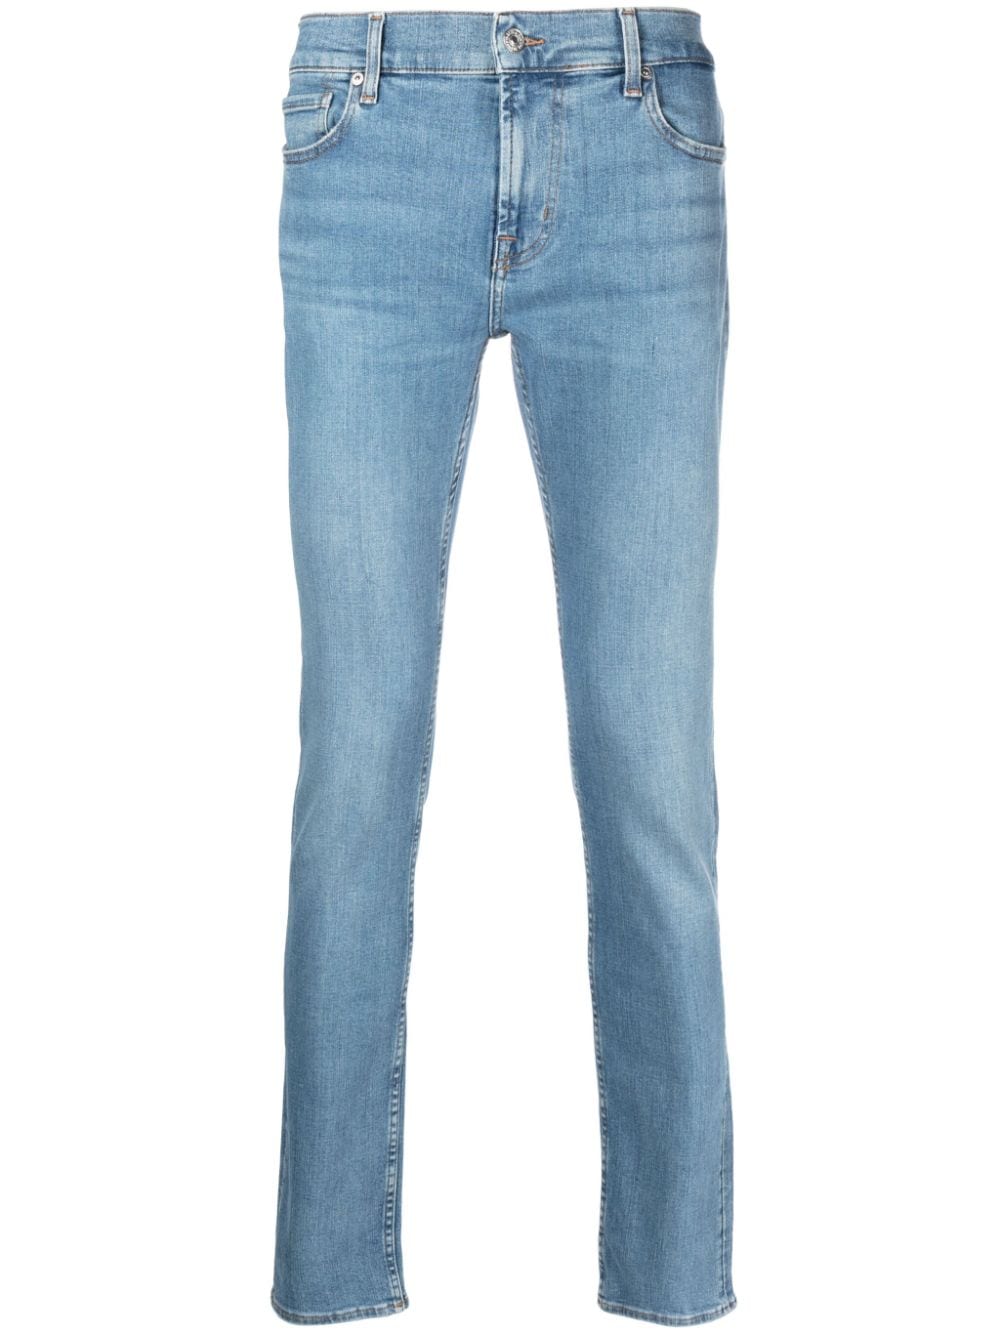 7 For All Mankind Paxtyn mid-rise skinny jeans - Blue von 7 For All Mankind